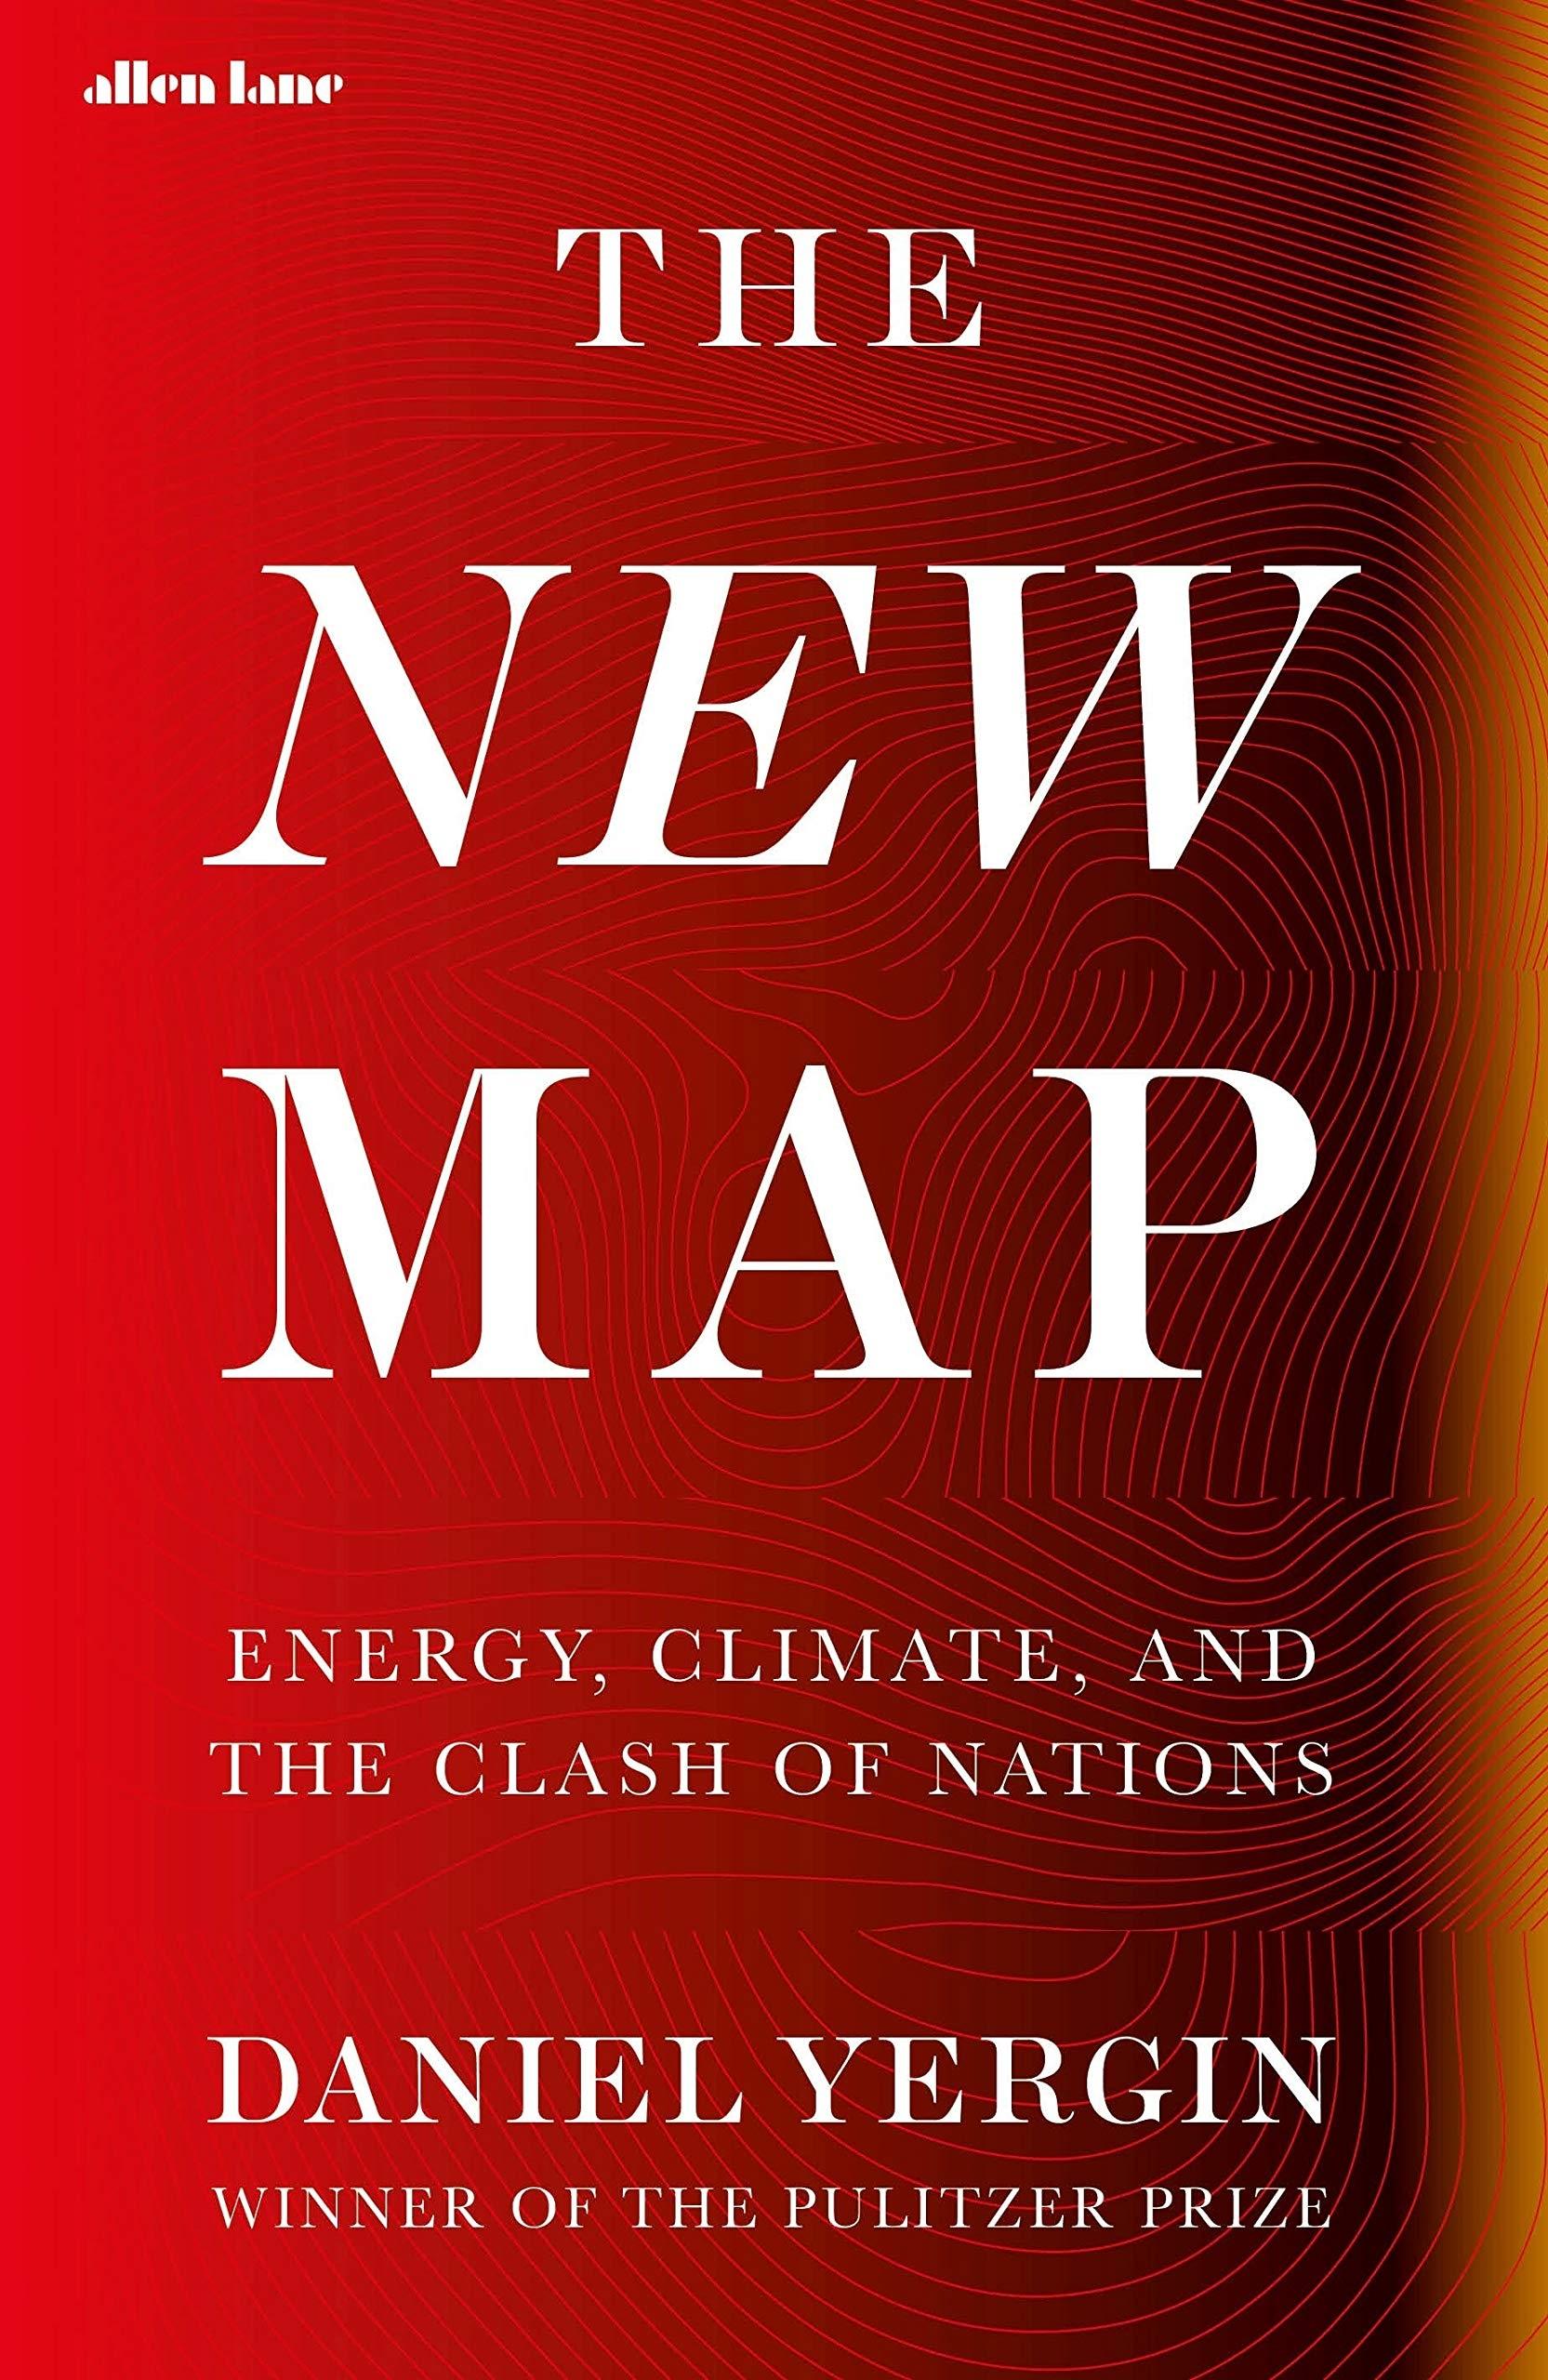 The New Map "Energy, Climate, and the Clash of Nations"